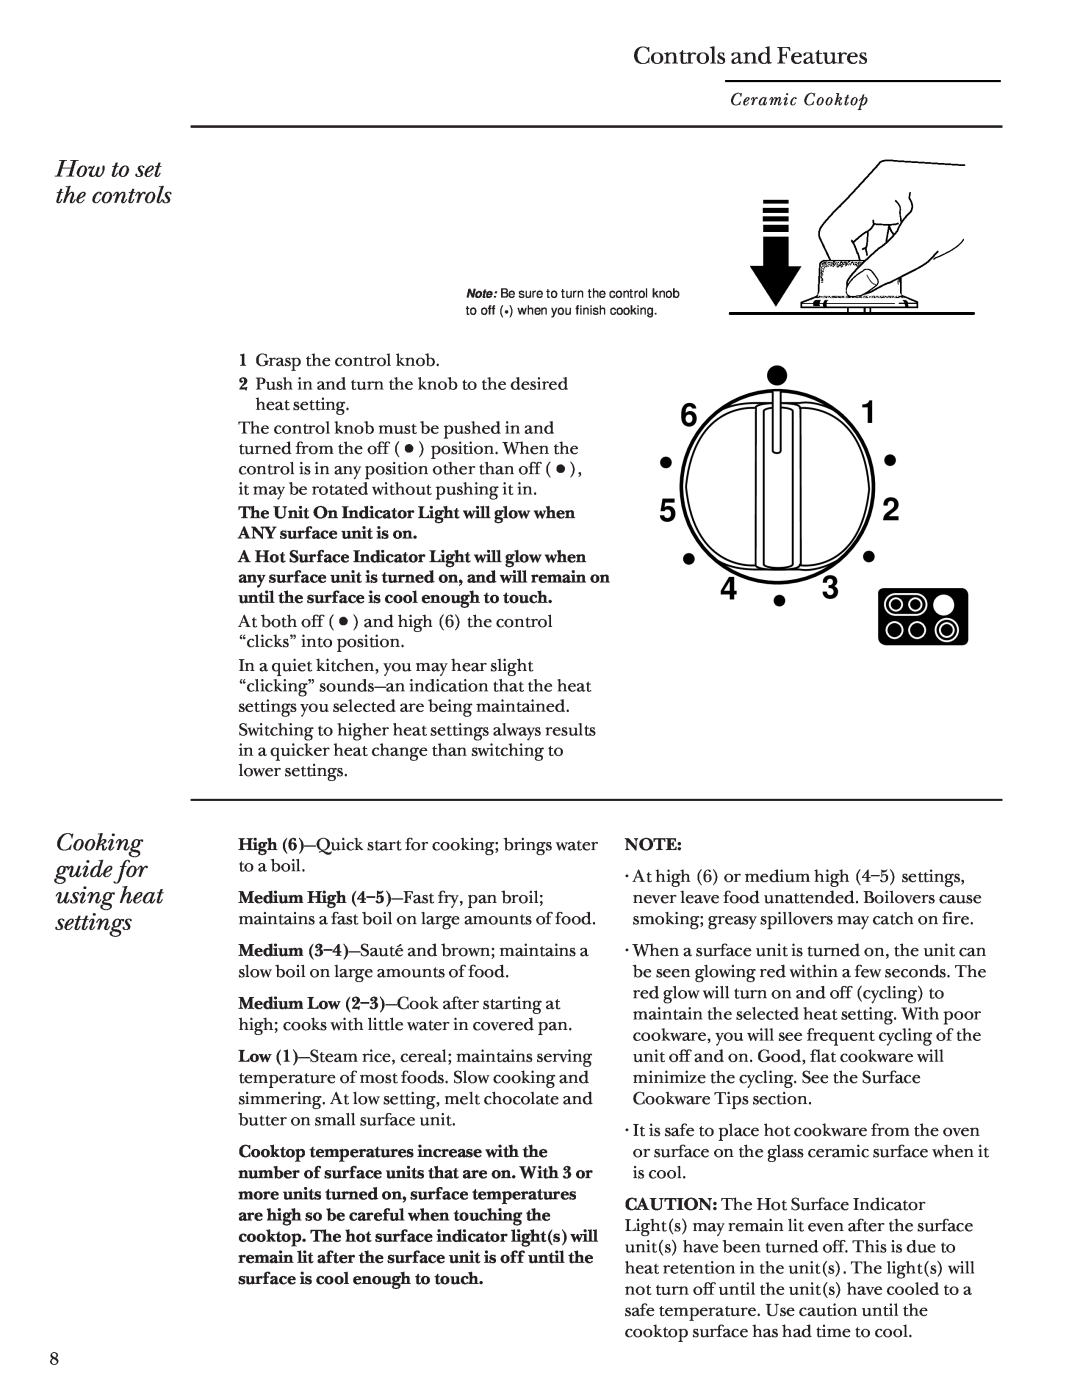 GE Monogram 36 Ceramic Cooktop manual How to set the controls, Controls and Features, Cooking guide for using heat settings 